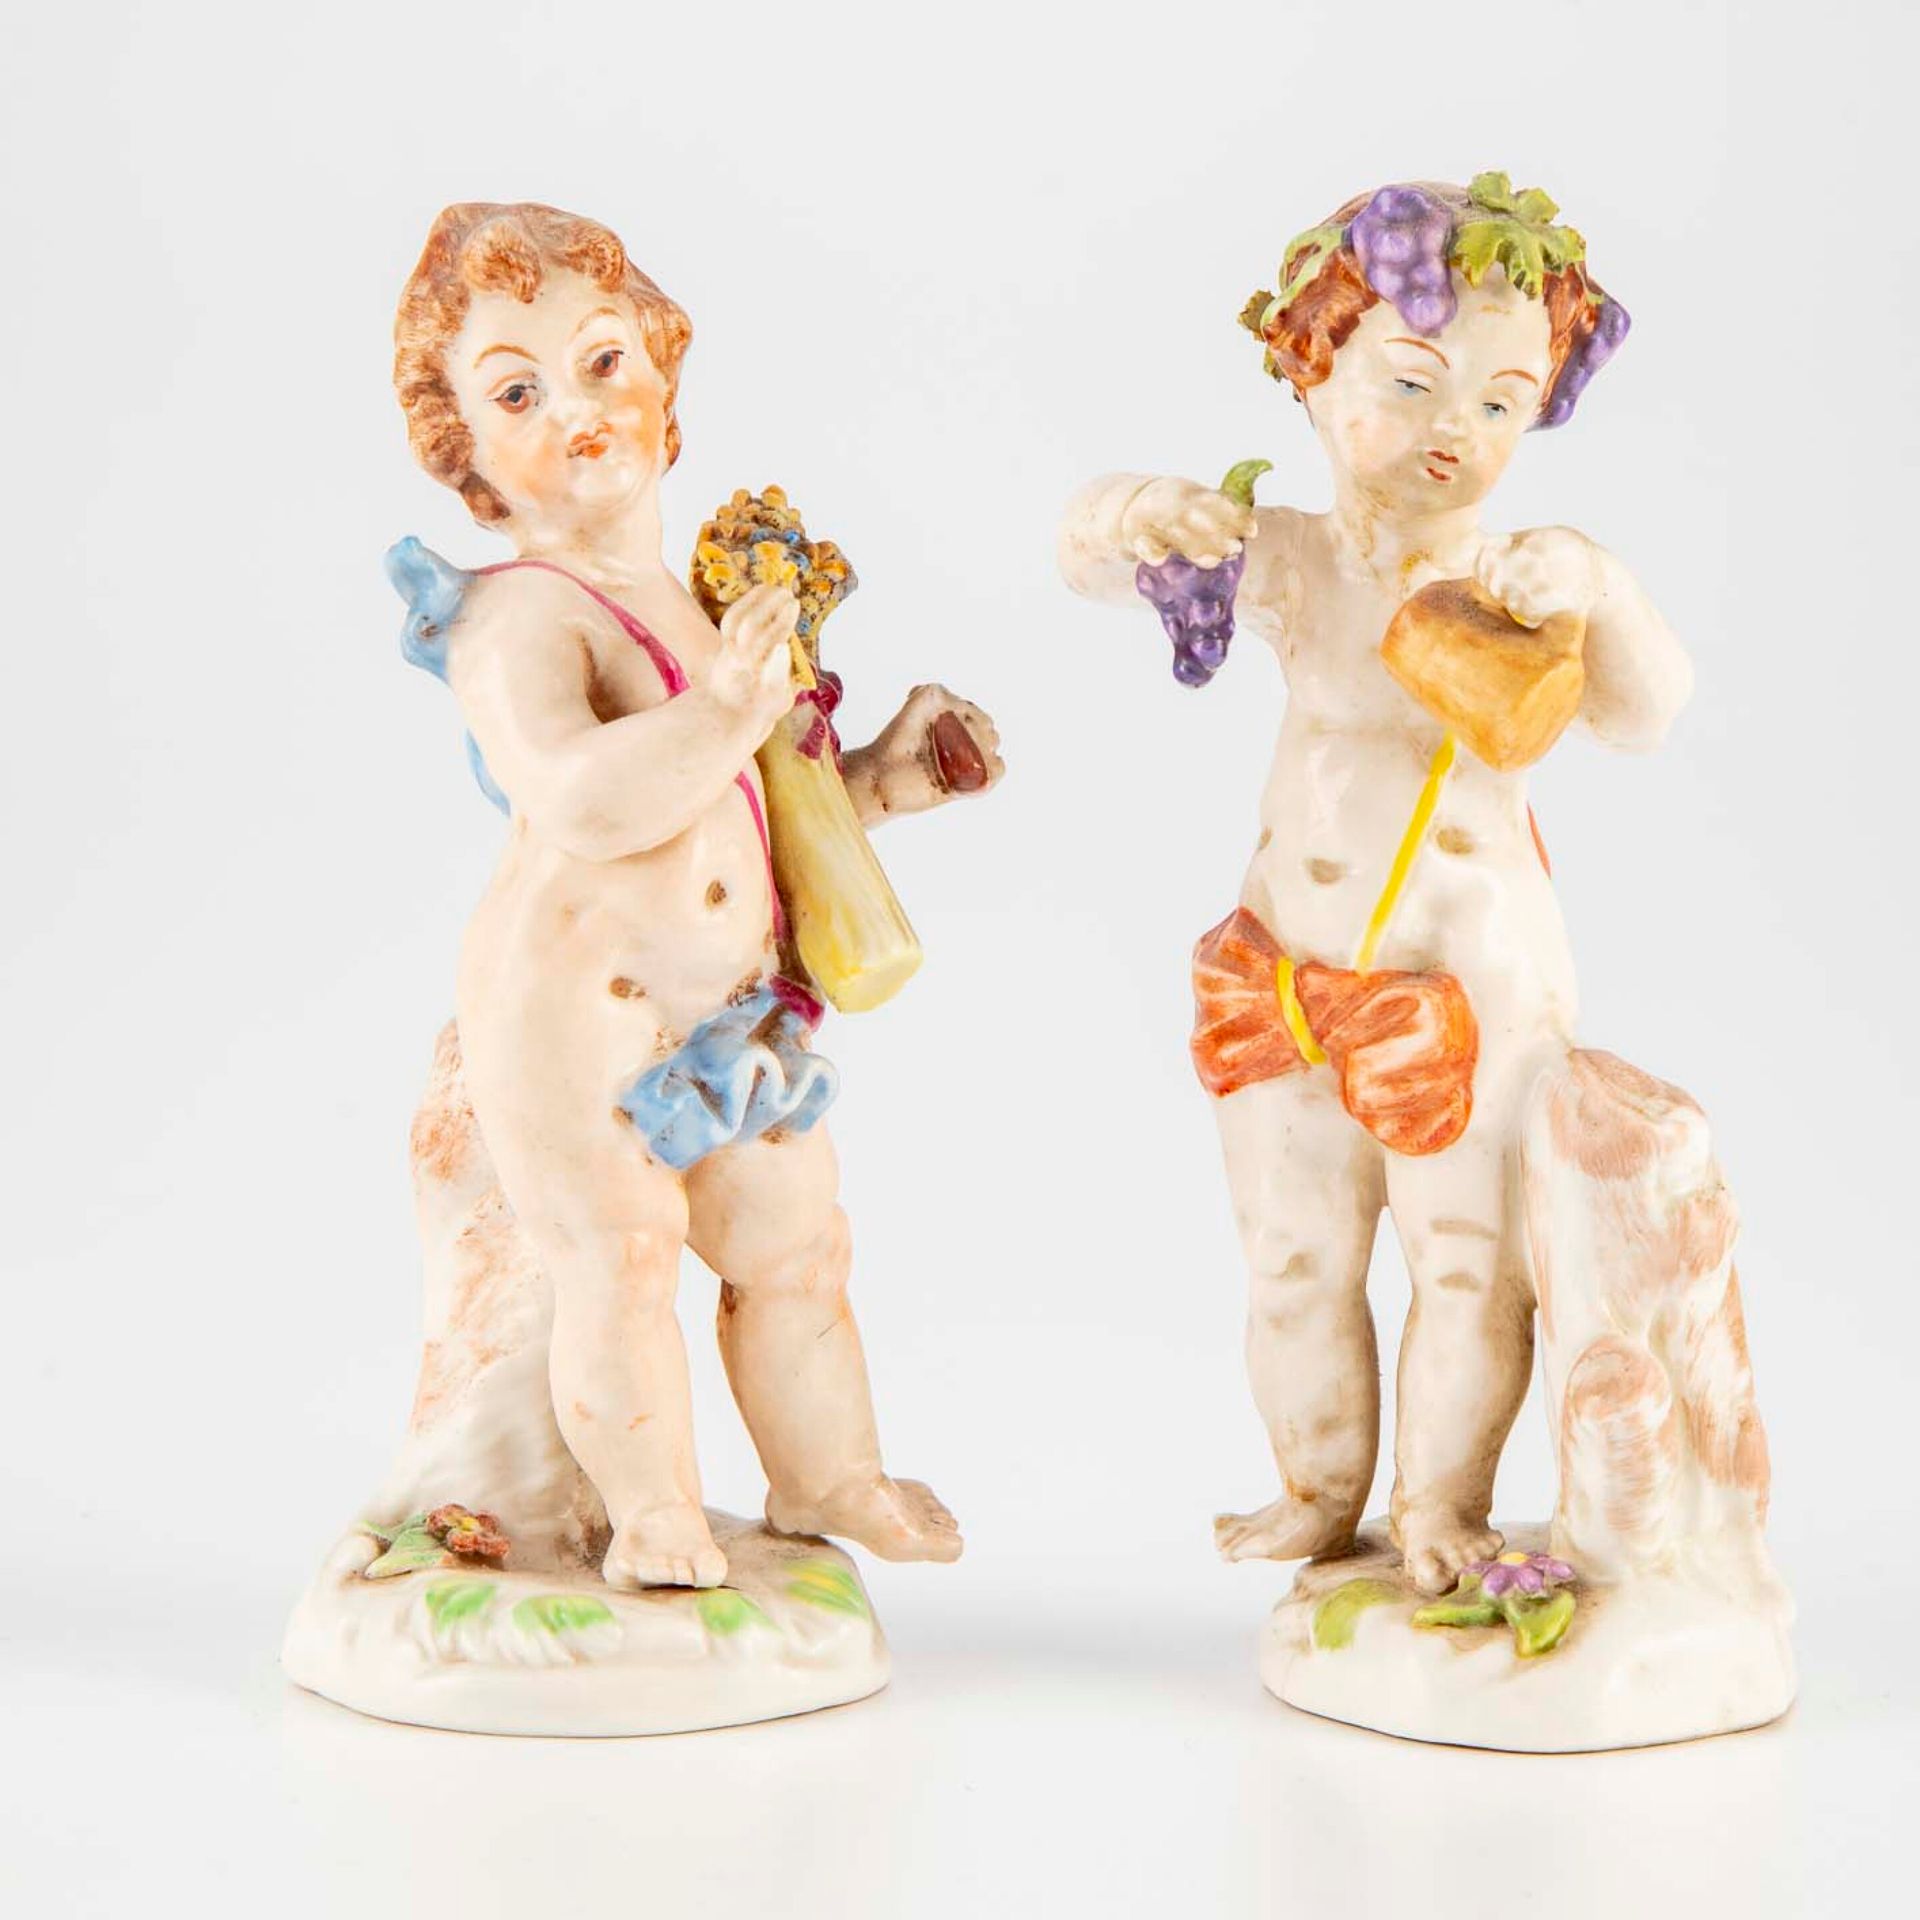 Null NAPLES (kind of)

Two porcelain statuettes representing love allegories of &hellip;